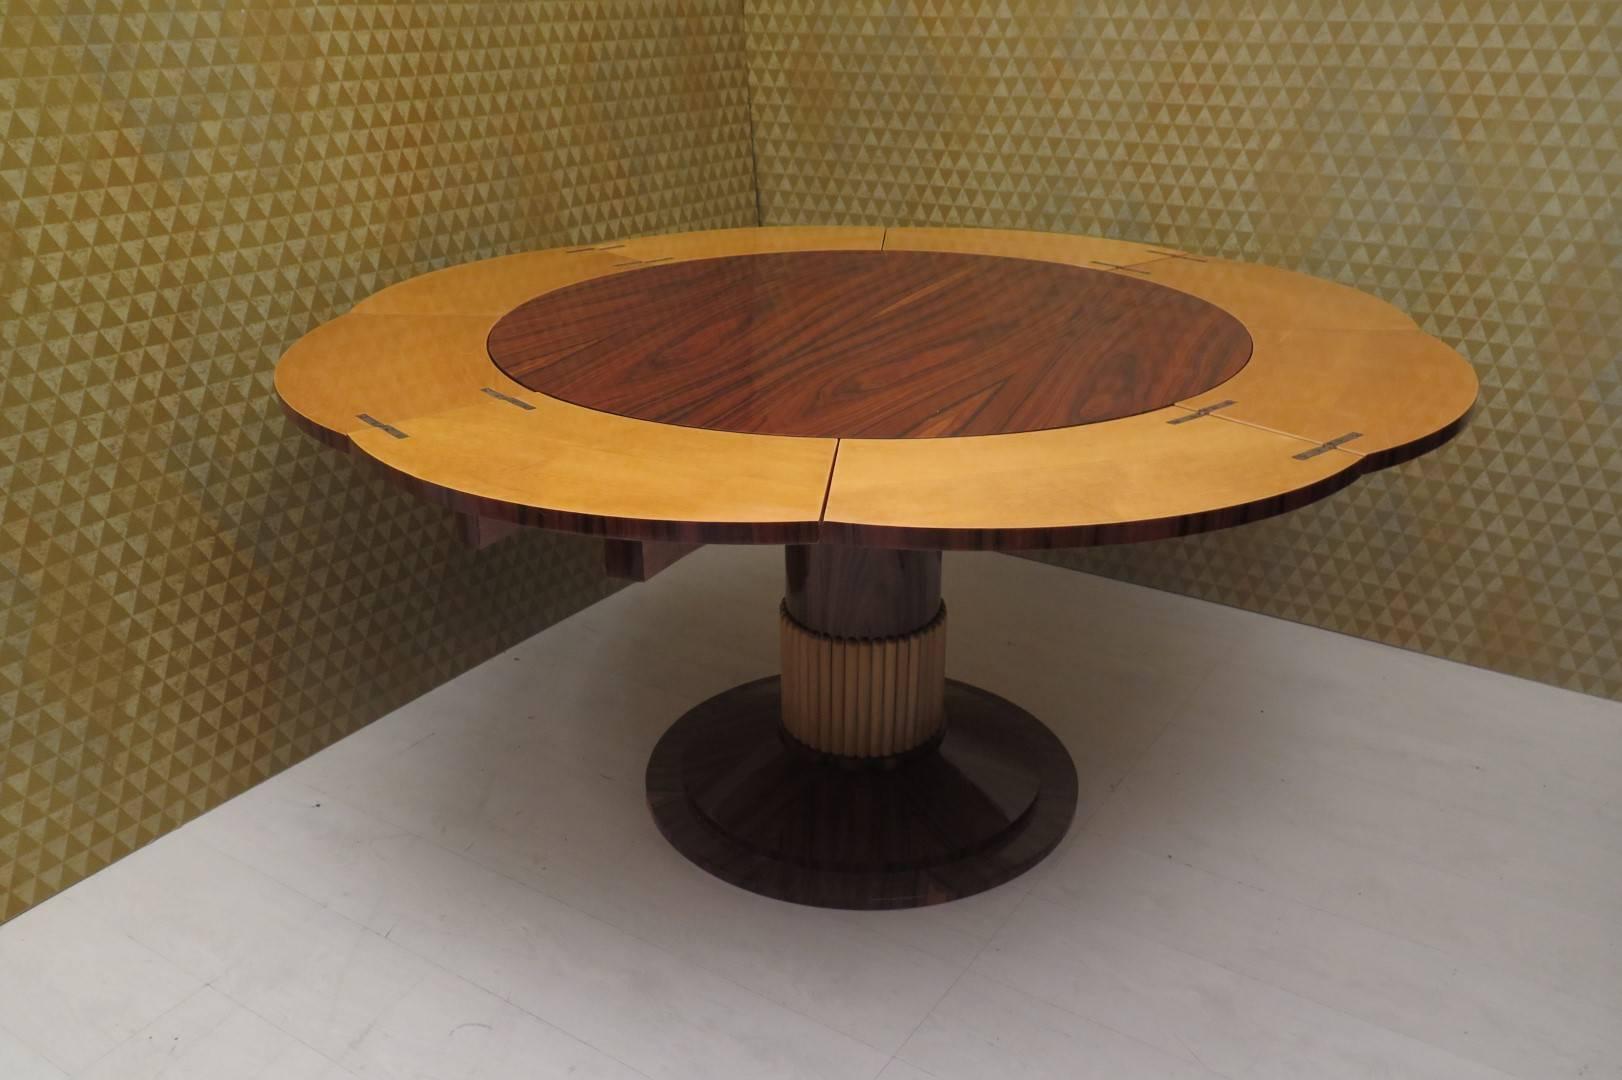 Italian Art Deco table. 

Walnut wood veneer with internal inserts in maple wood. The foot is central and fixed, also veneered all in walnut.
To notice a particular opening mechanism like a 